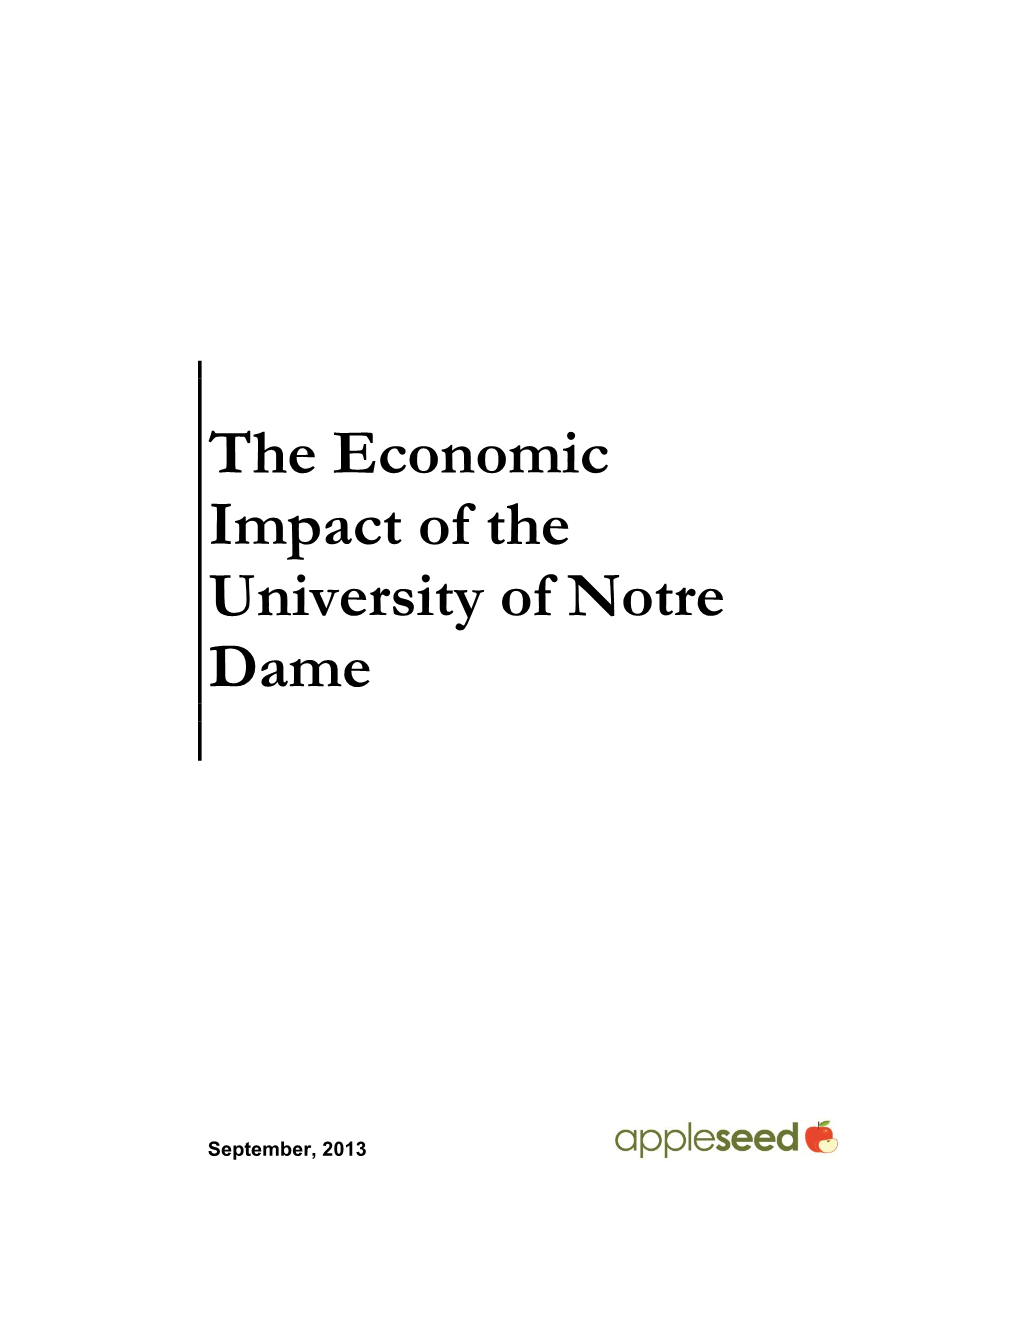 The Economic Impact of the University of Notre Dame